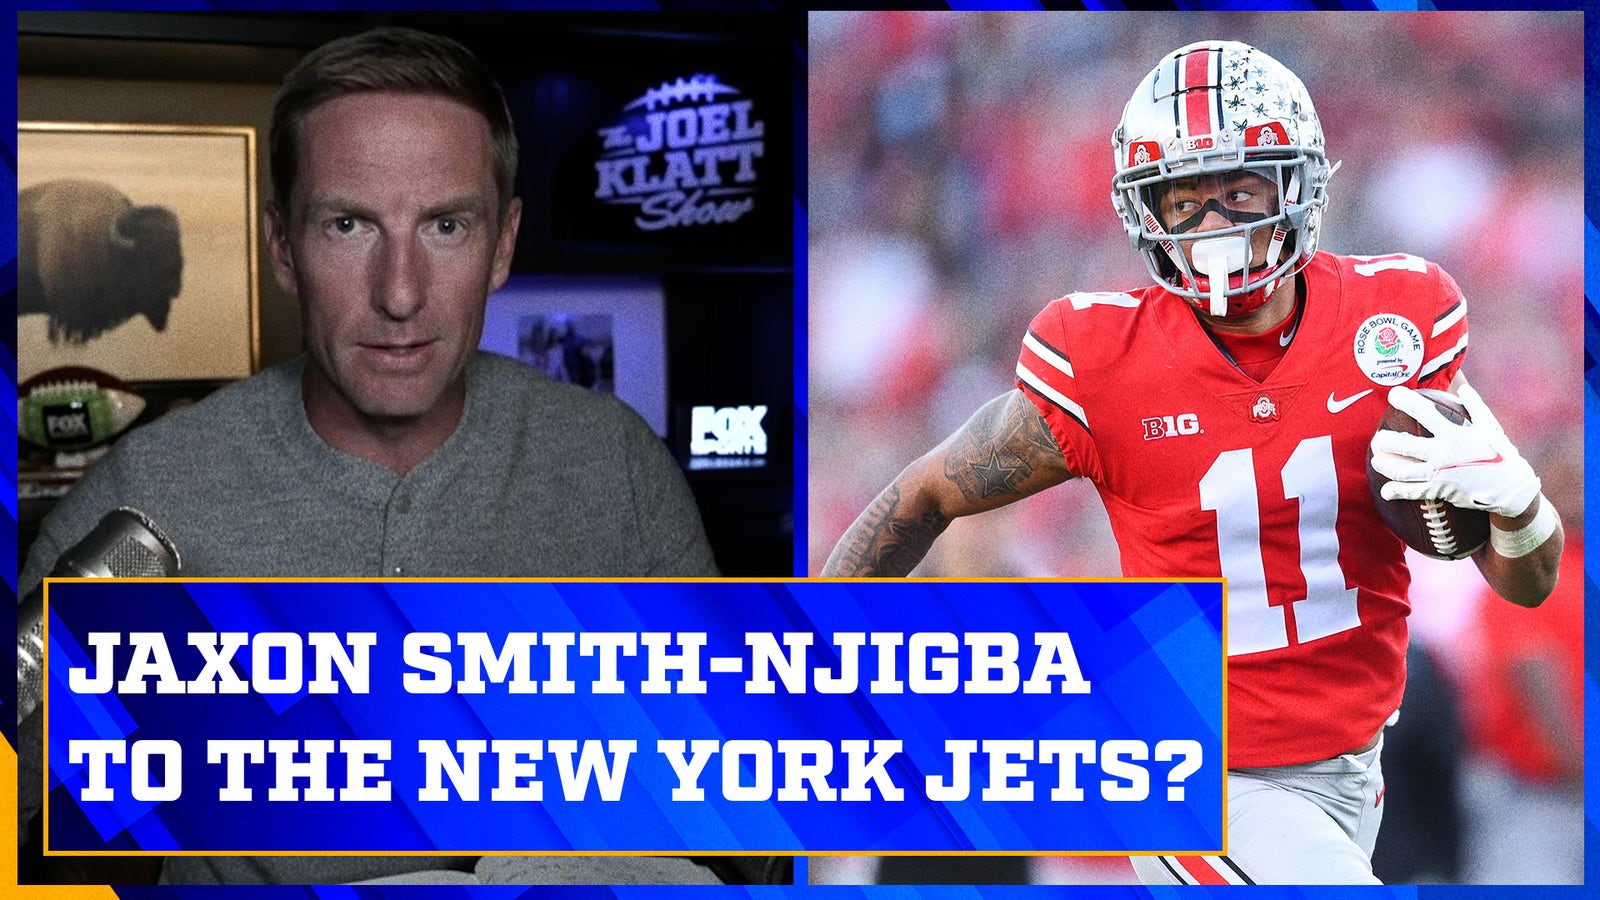 Why Jaxon Smith-Njigba would pair perfectly with Aaron Rodgers and the New York Jets